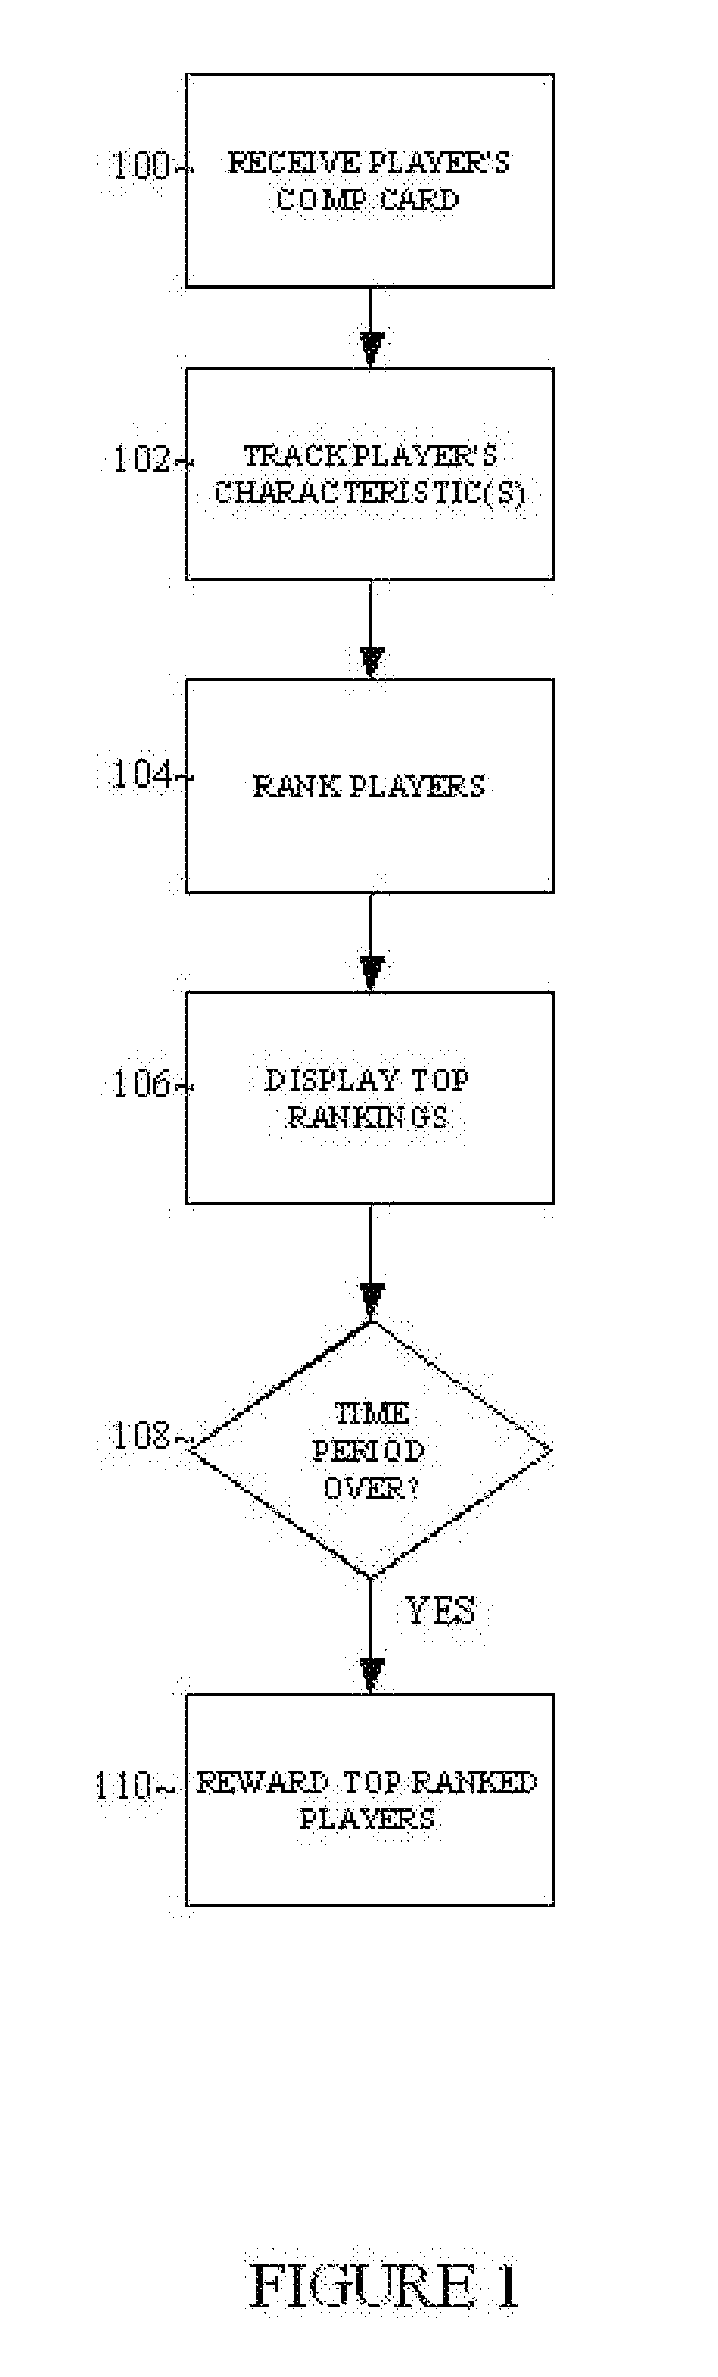 System and method for tracking and rewarding gamblers based on relative wagering characteristics